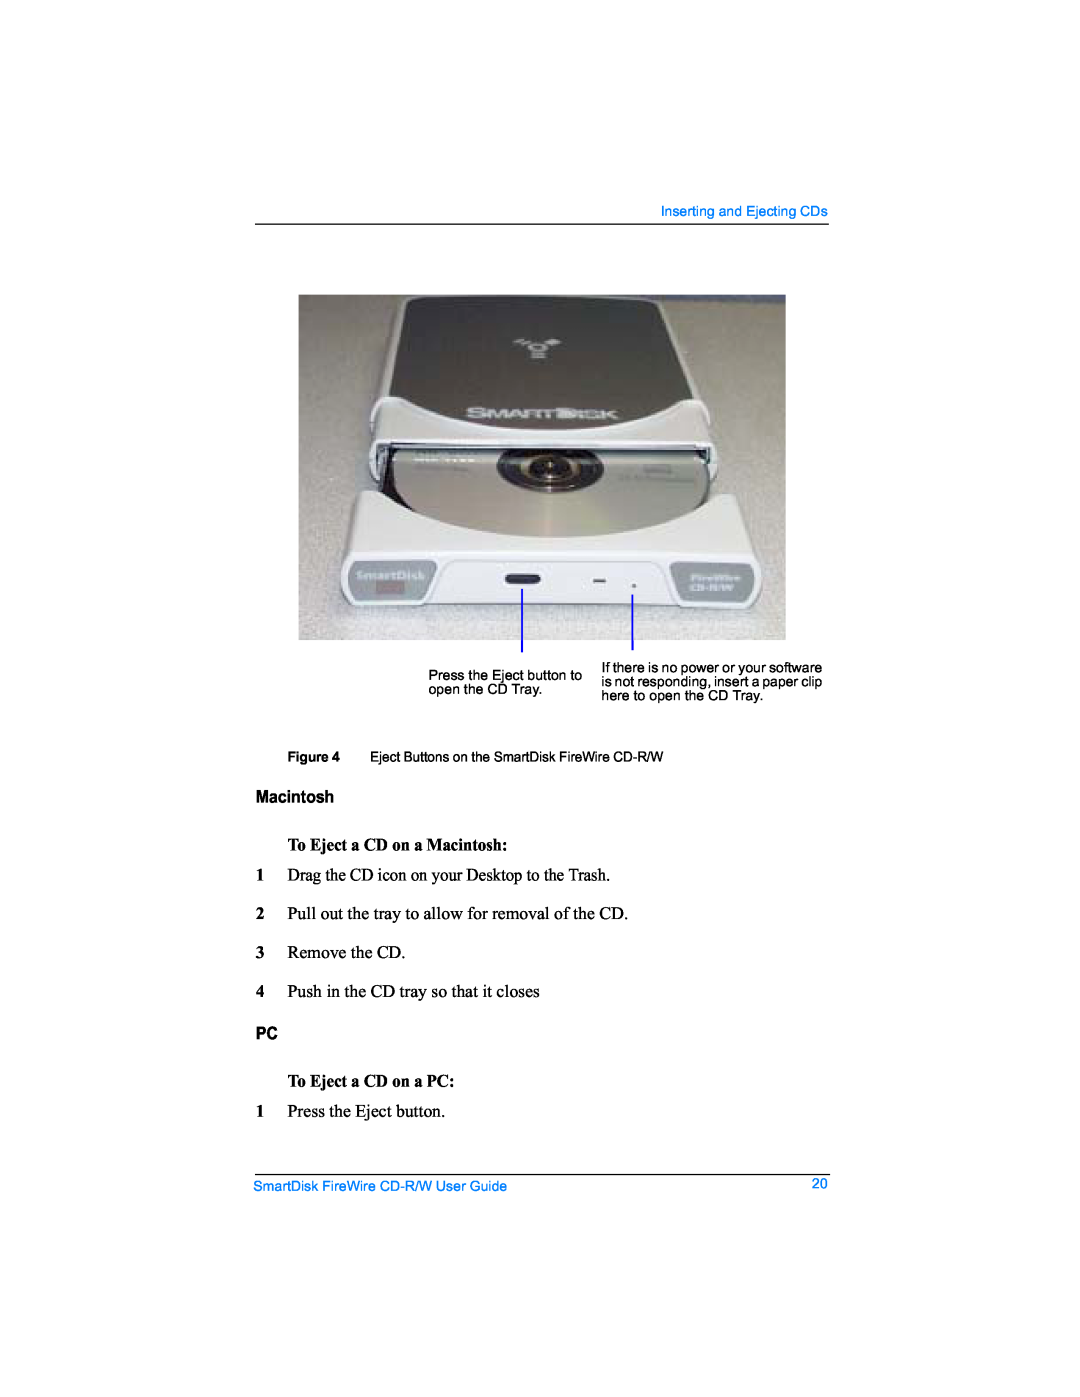 SmartDisk Firewire CD-R/W manual To Eject a CD on a Macintosh, To Eject a CD on a PC, Inserting and Ejecting CDs 